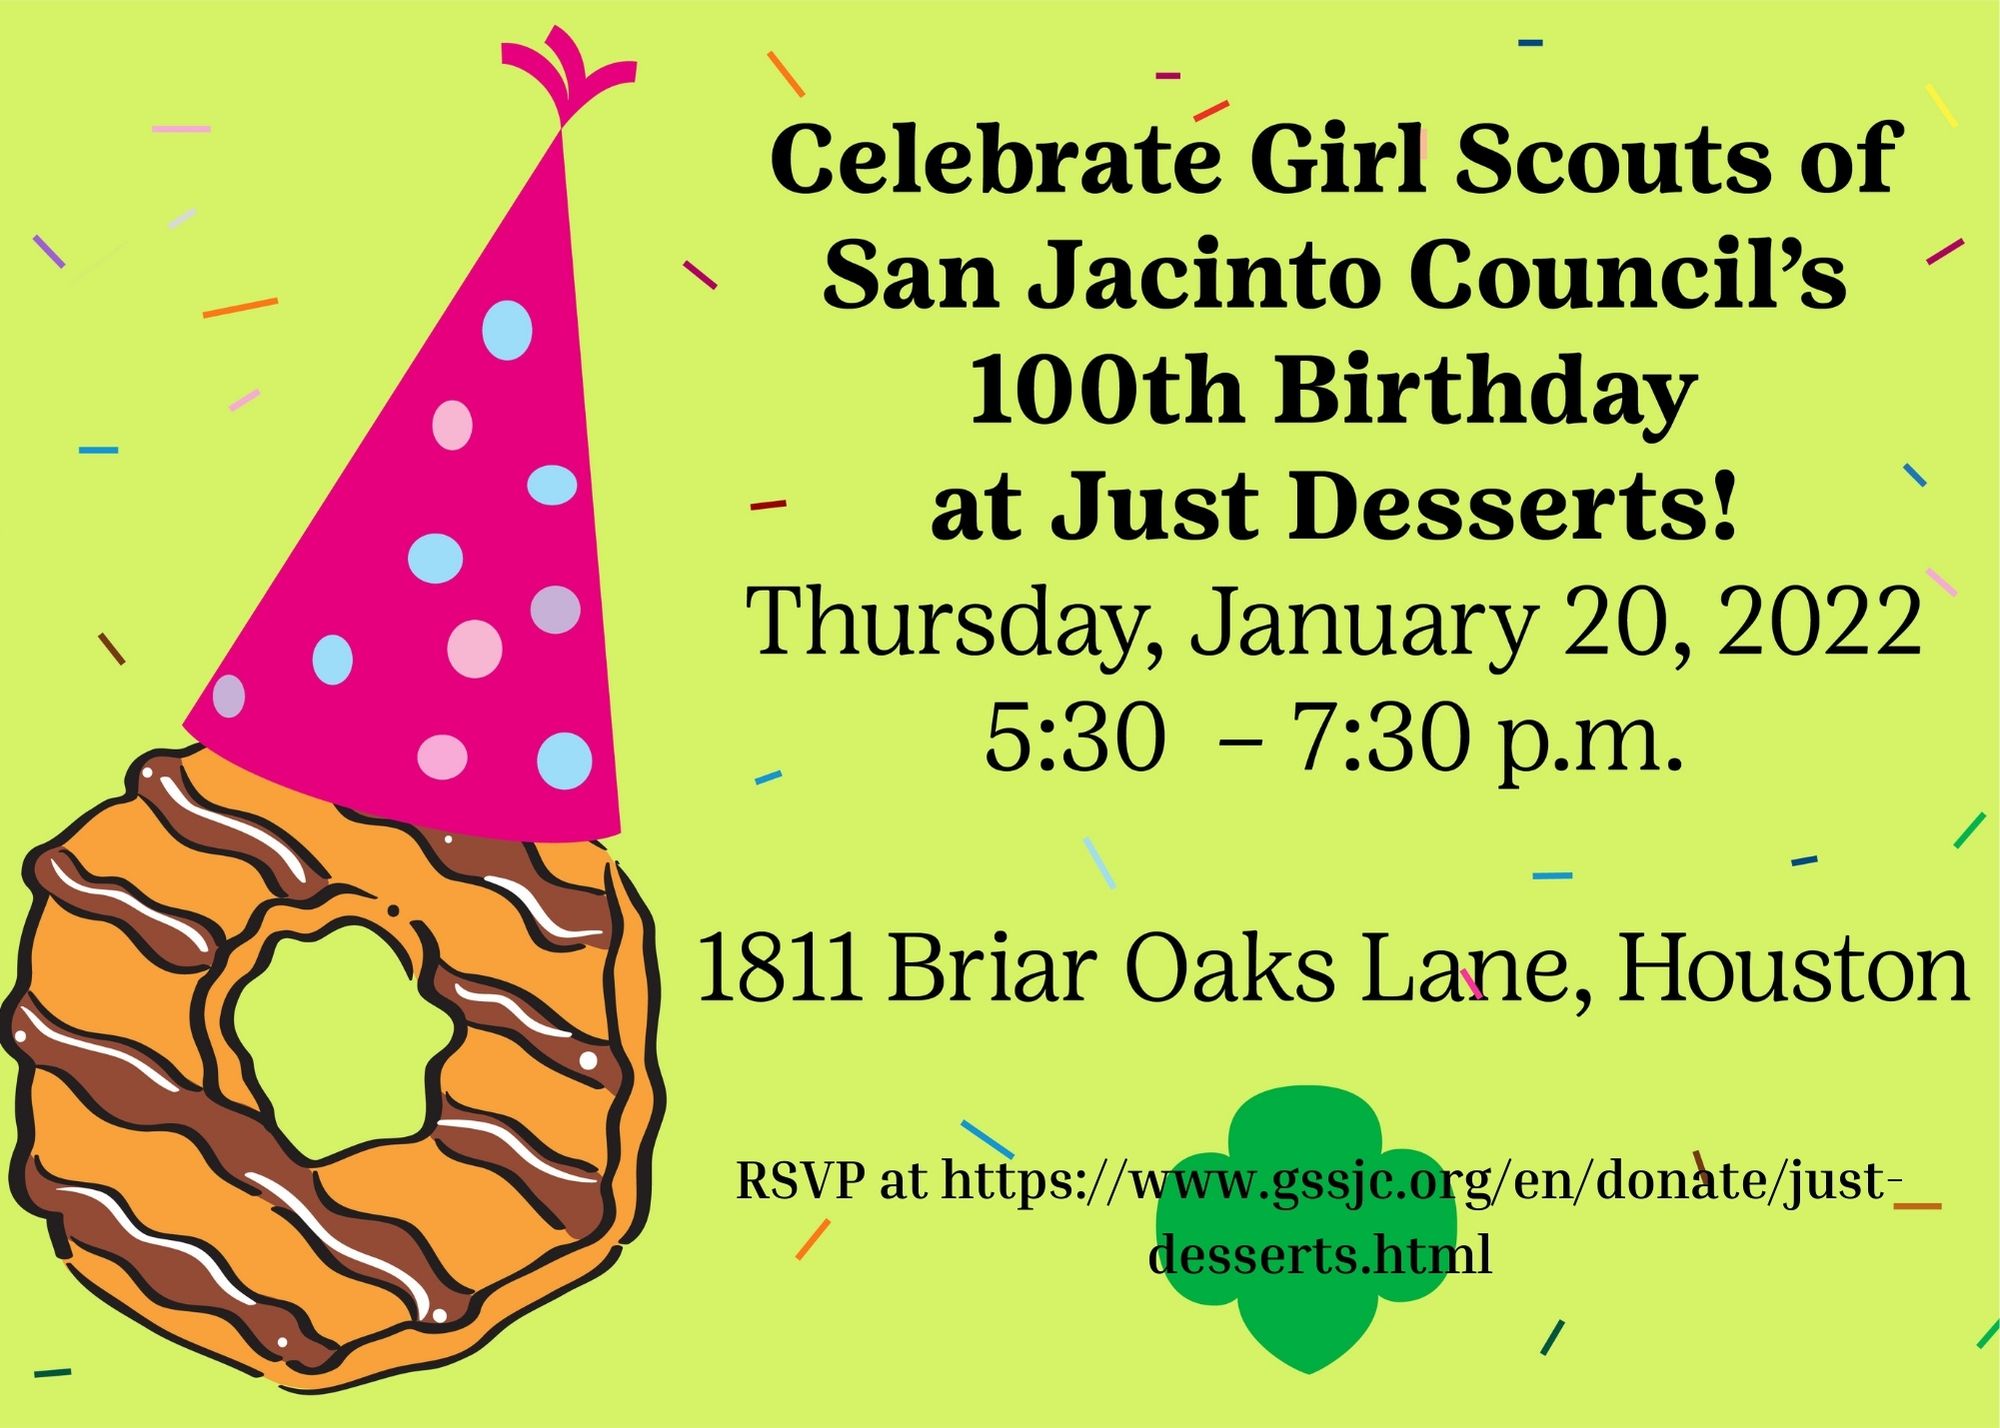 Girl Scouts of San Jacinto Council 100th Birthday at Just Desserts